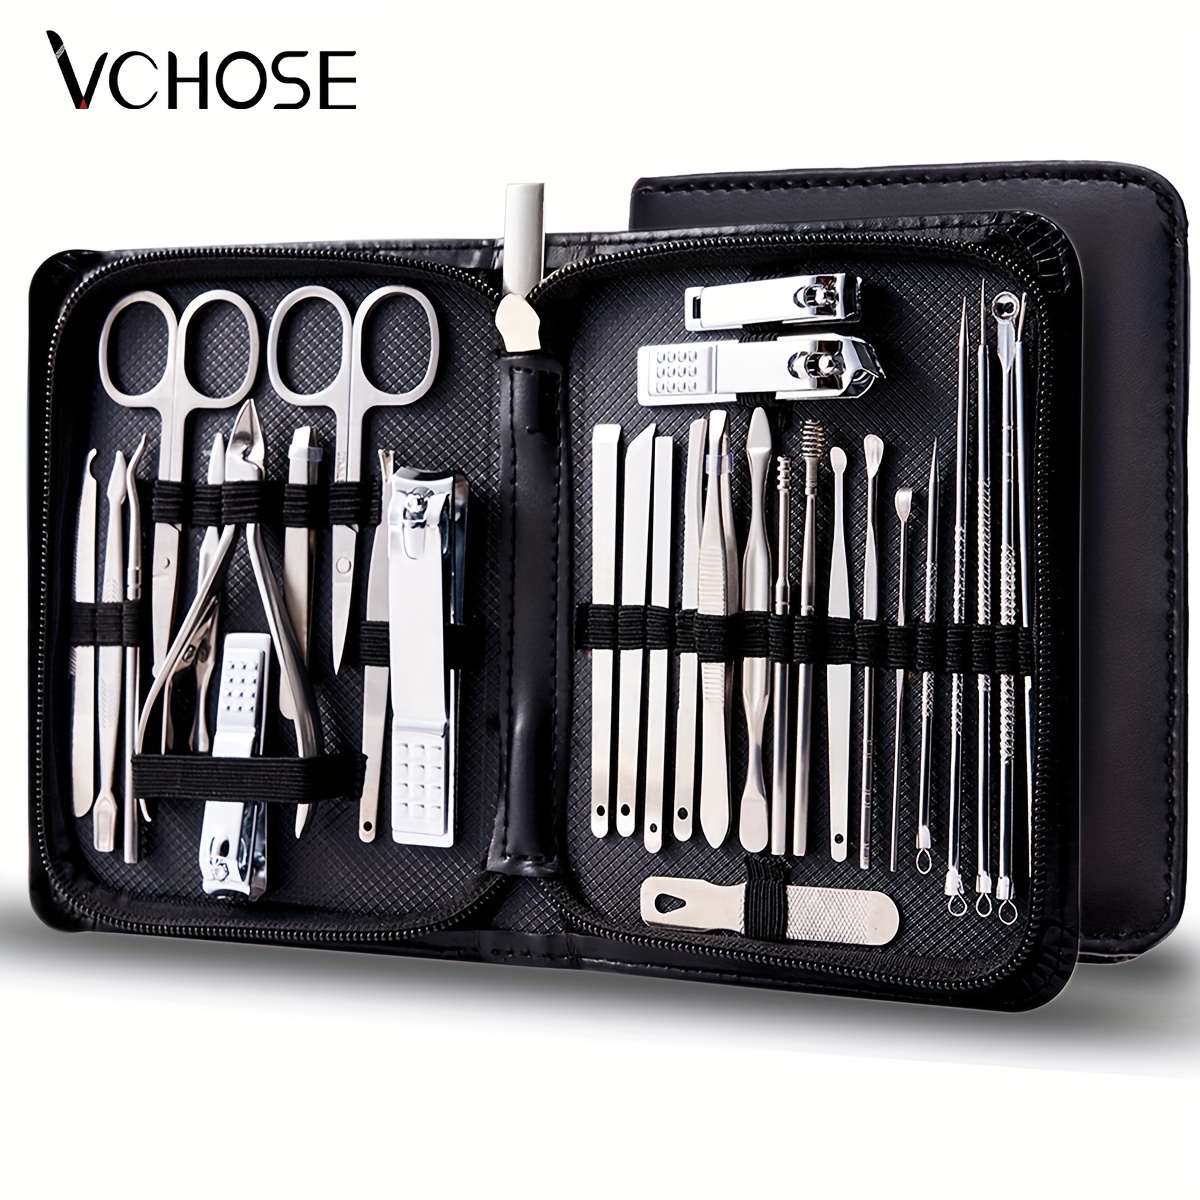 

30pcs Nail Clippers Manicure Tool Set, With Portable Travel Case, Cuticle Nippers And Cutter Kit, Professional Nail Clippers Pedicure Kit